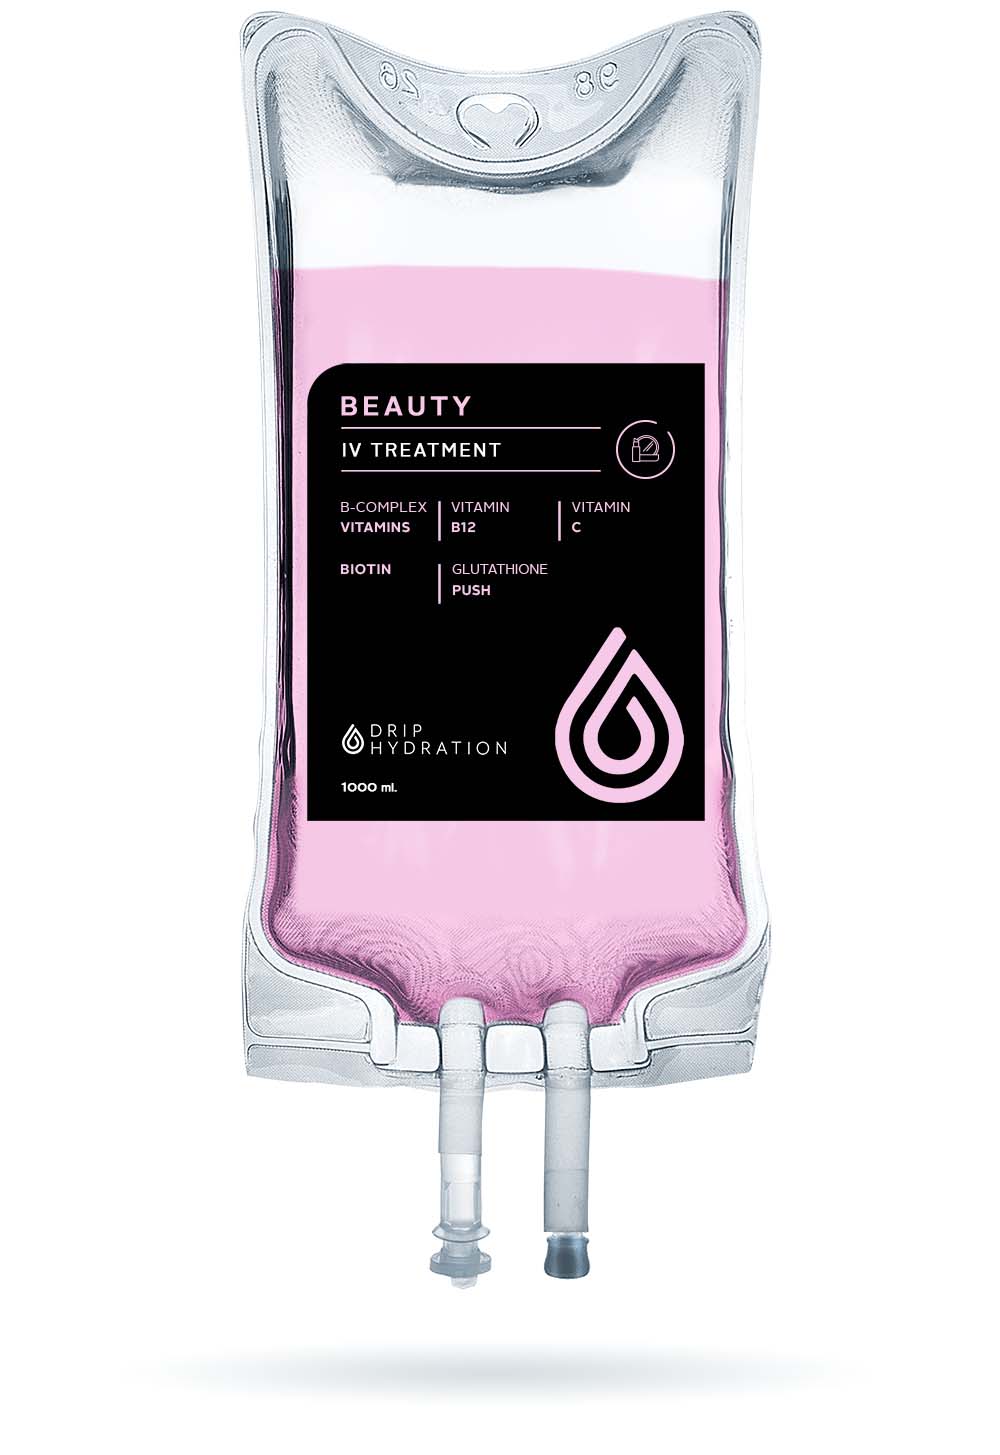 infusion bag named Beauty iv linking toward the service page